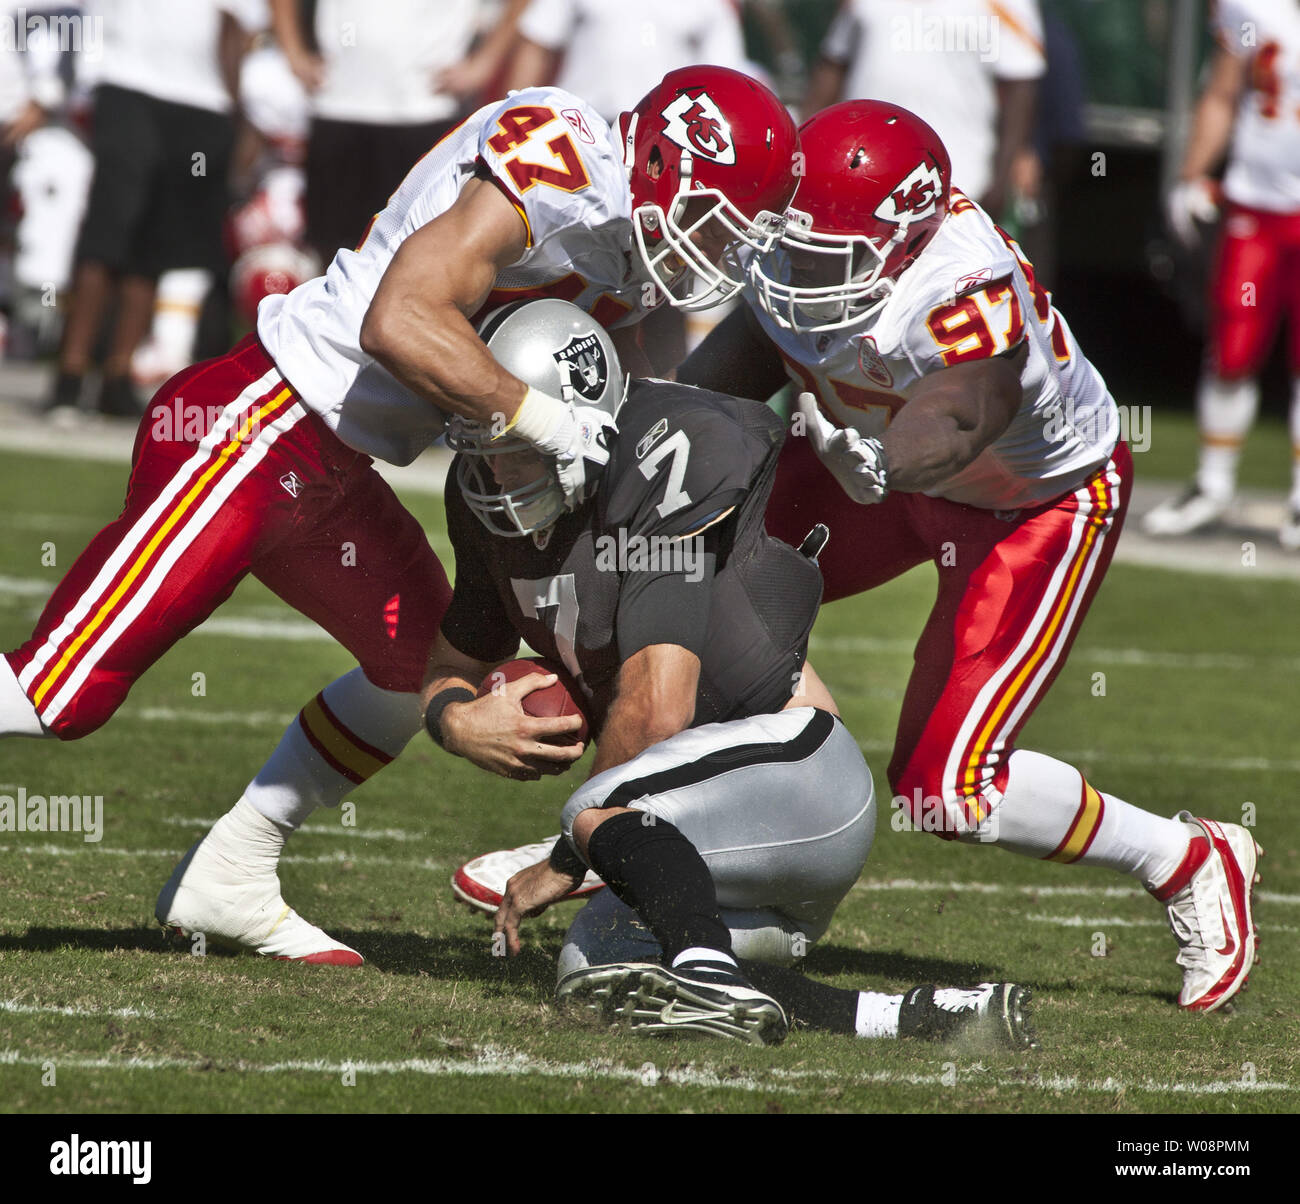 Oakland Raiders QB Kyle Boller (7) is tackled by Kansas City Chiefs Jon McGraw (47) and Allen Bailey (97) at the O.co Coliseum in Oakland, California on October 23, 2011.   UPI/Terry Schmitt Stock Photo